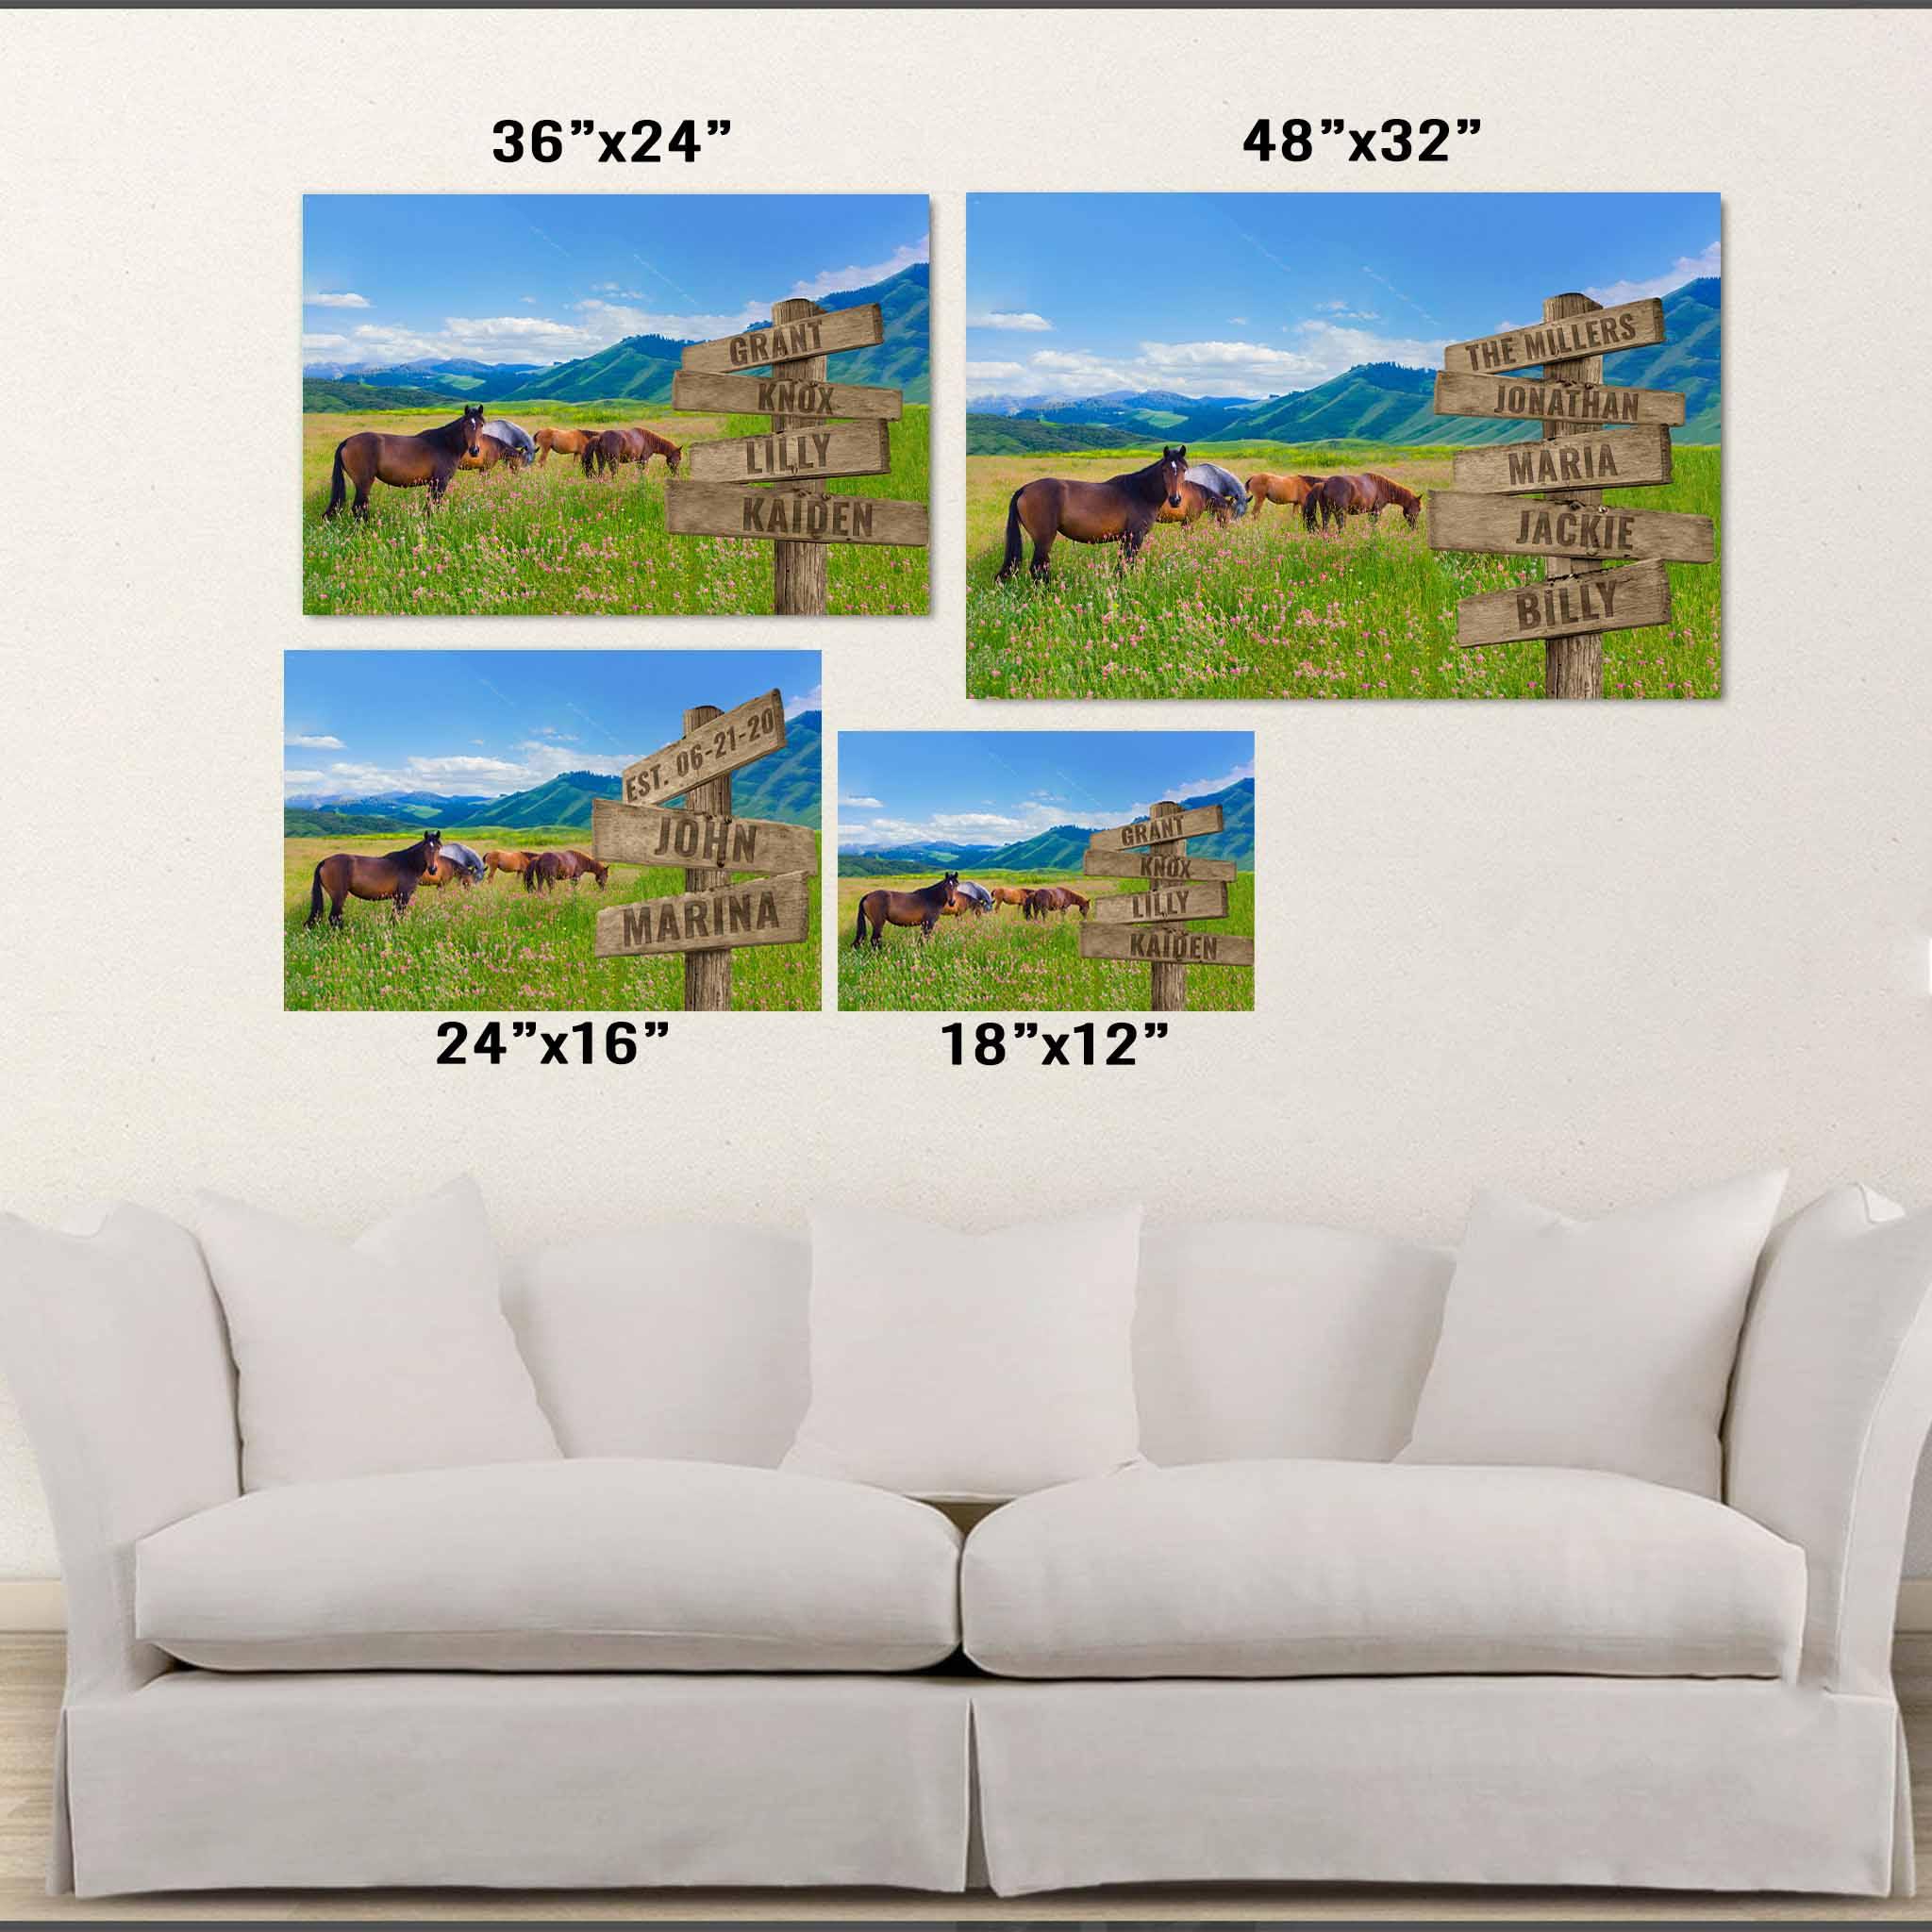 Horses Field Of Wildflowers Multiple Names Personalized Directional Sign CanvasCustomly Gifts